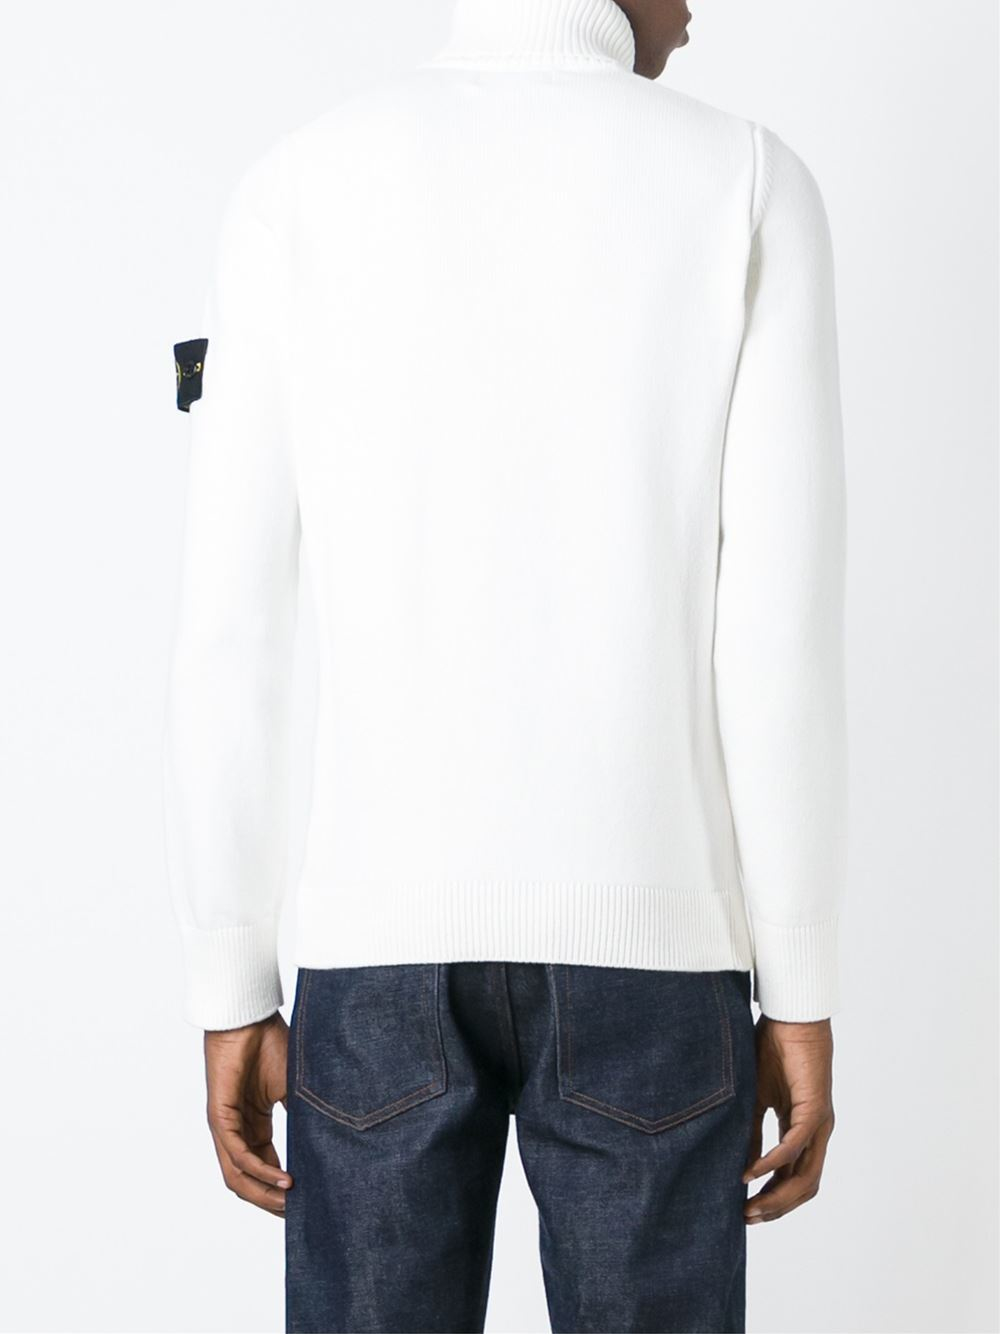 Stone Island Roll Neck Sweater in White for Men - Lyst